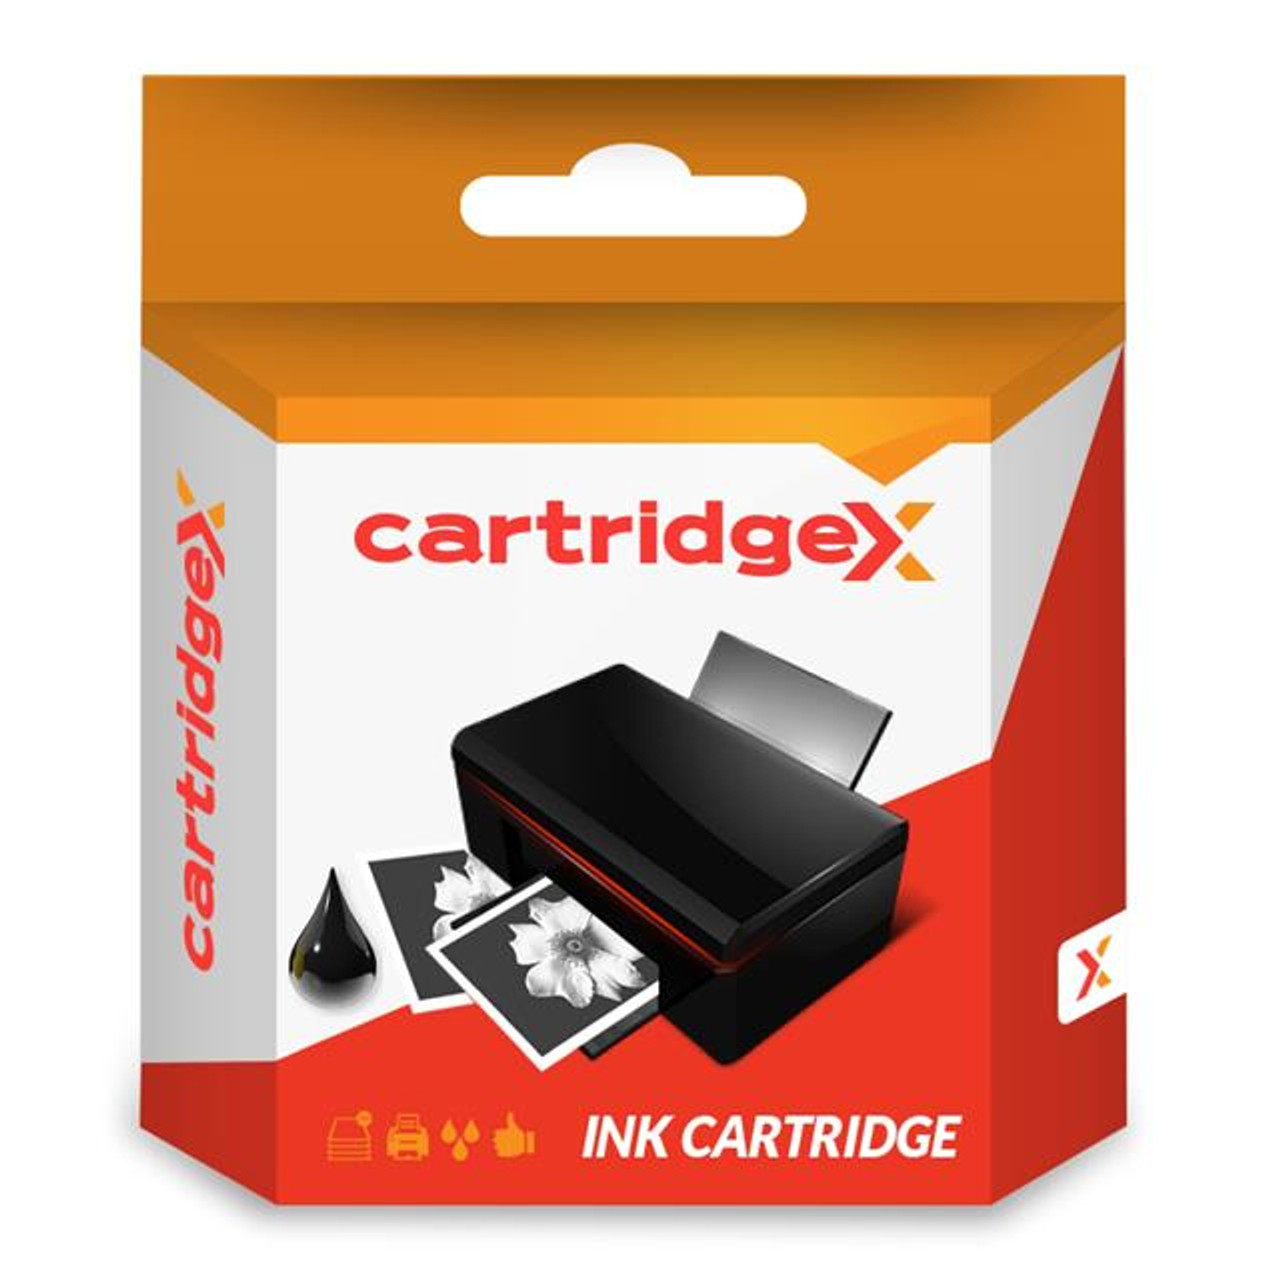 Compatible Black Ink Cartridge For 364xl Hp Photosmart Plus All-in-one B209c B210 B210a